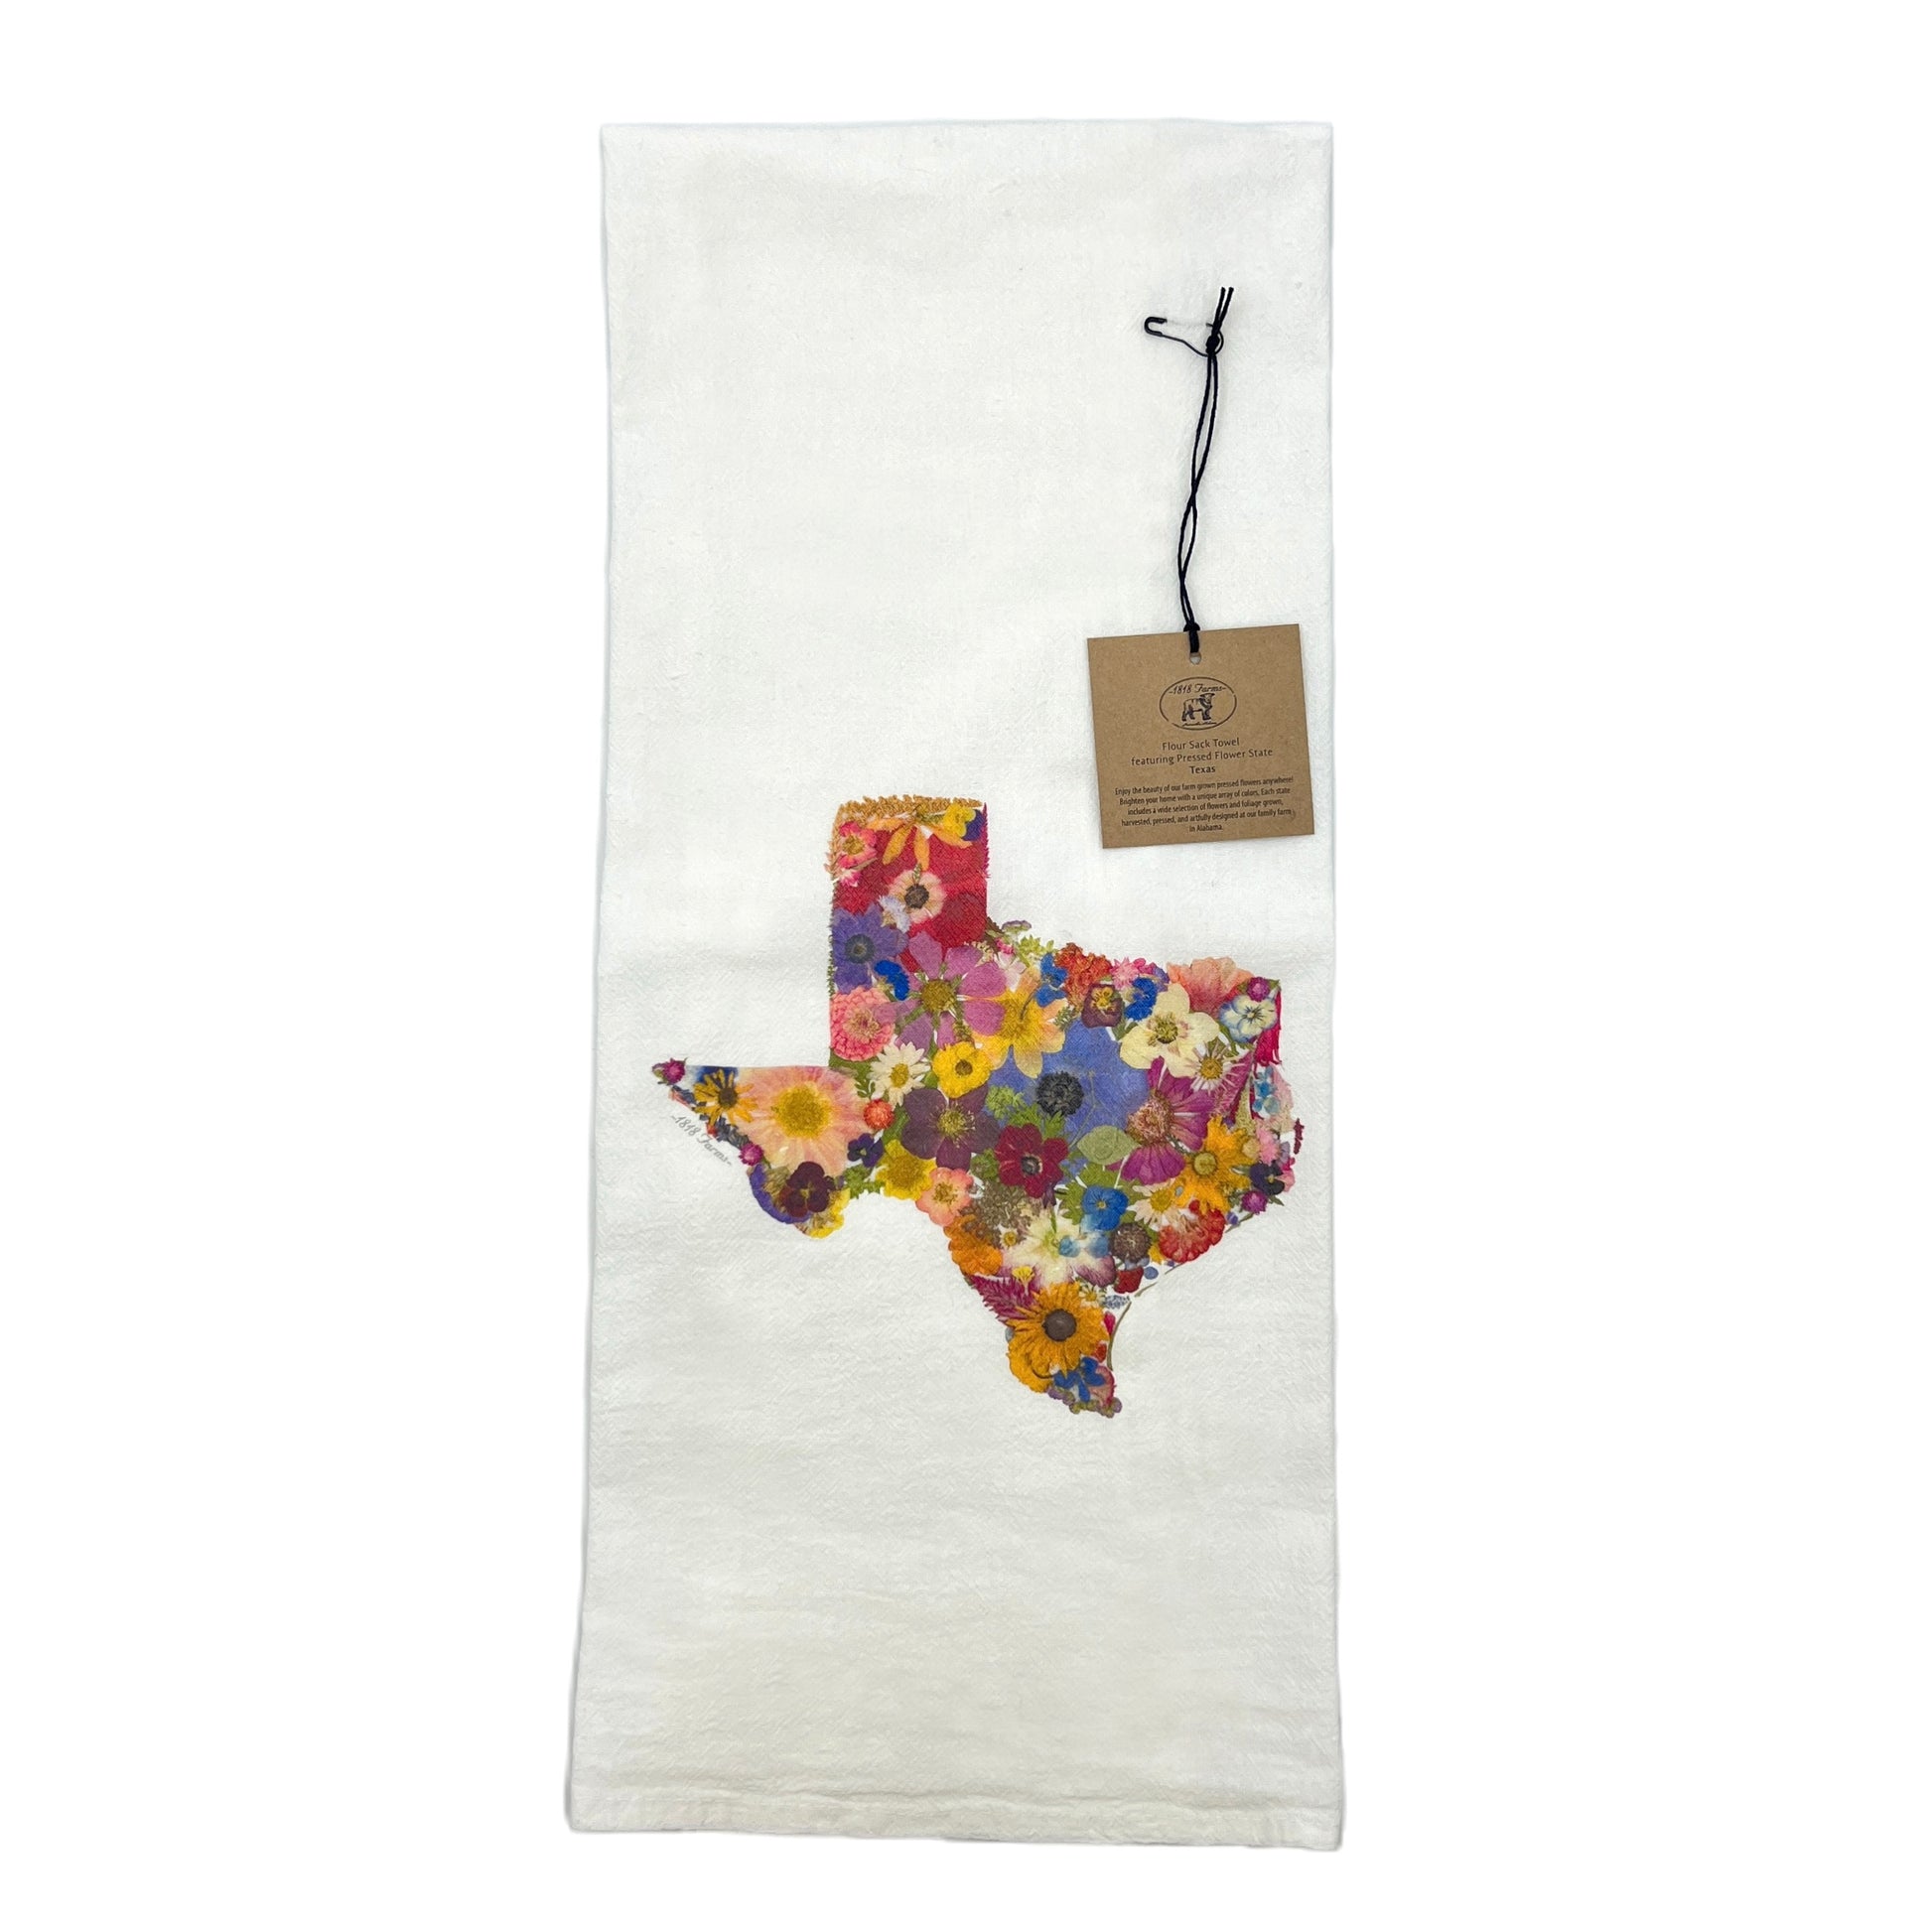 State Themed Flour Sack Towel Featuring Dried, Pressed Flowers - "Where I Bloom" Collection Towel 1818 Farms Texas  